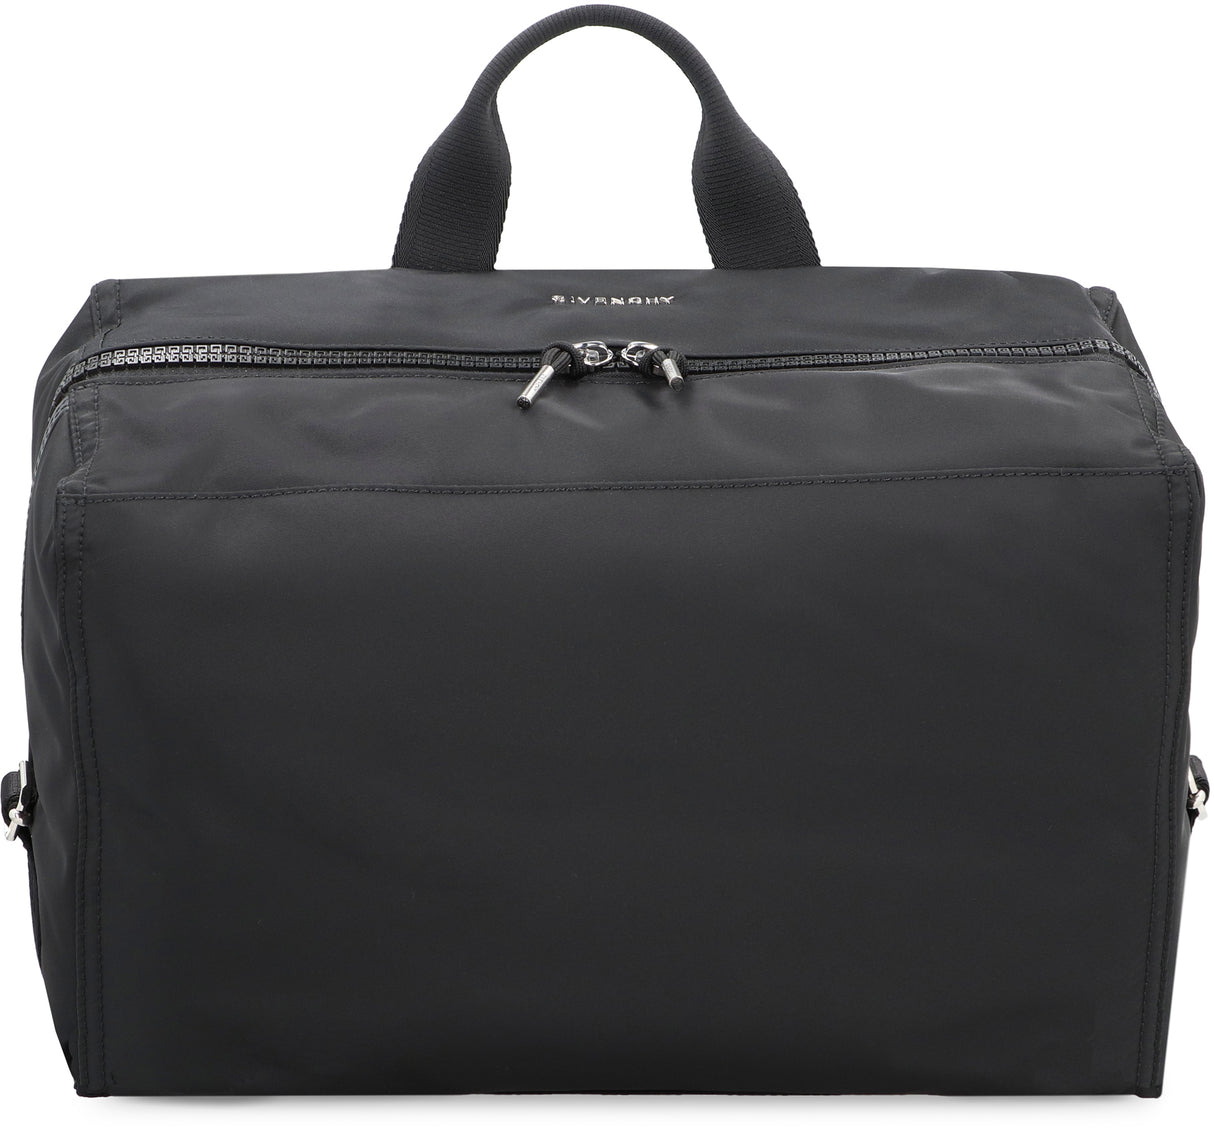 GIVENCHY Men's Modern Black Nylon Messenger Bag with Leather Accents, Two-Way Zip, and Adjustable Strap – Medium 40x26.5x19.5 cm